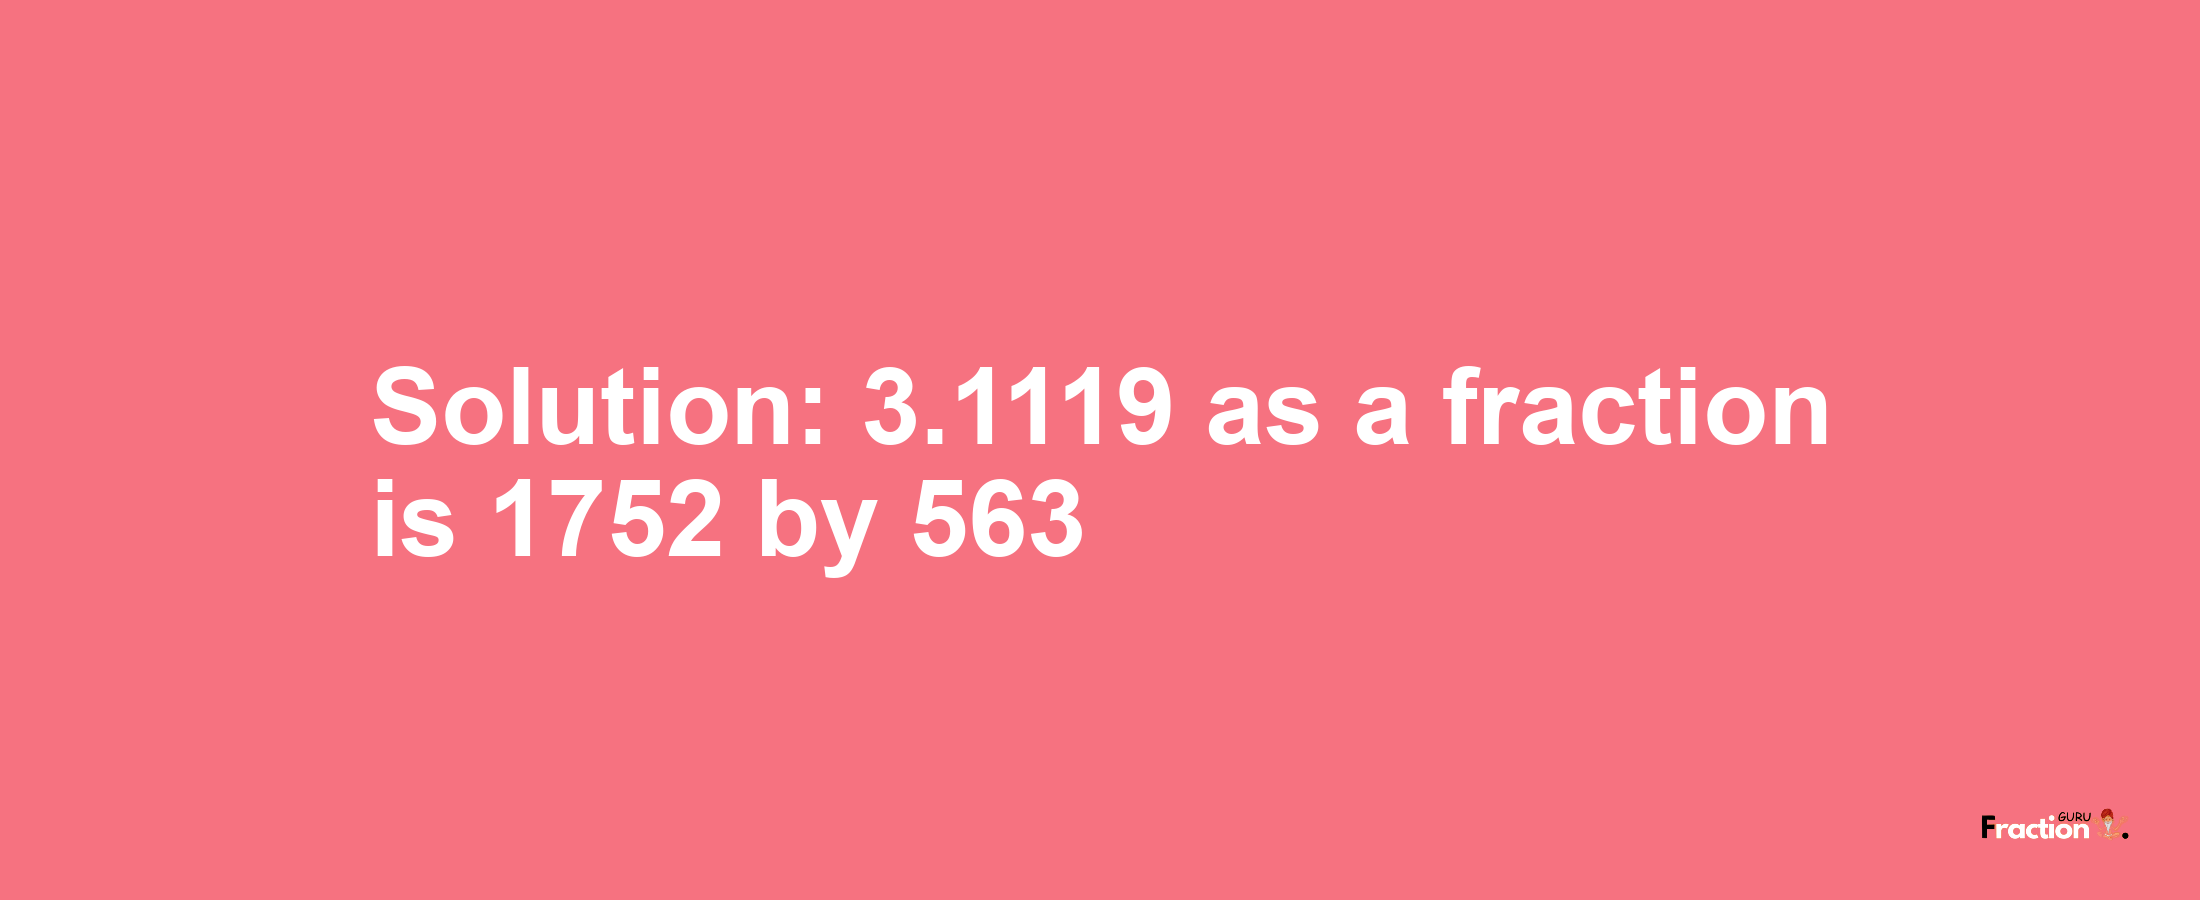 Solution:3.1119 as a fraction is 1752/563